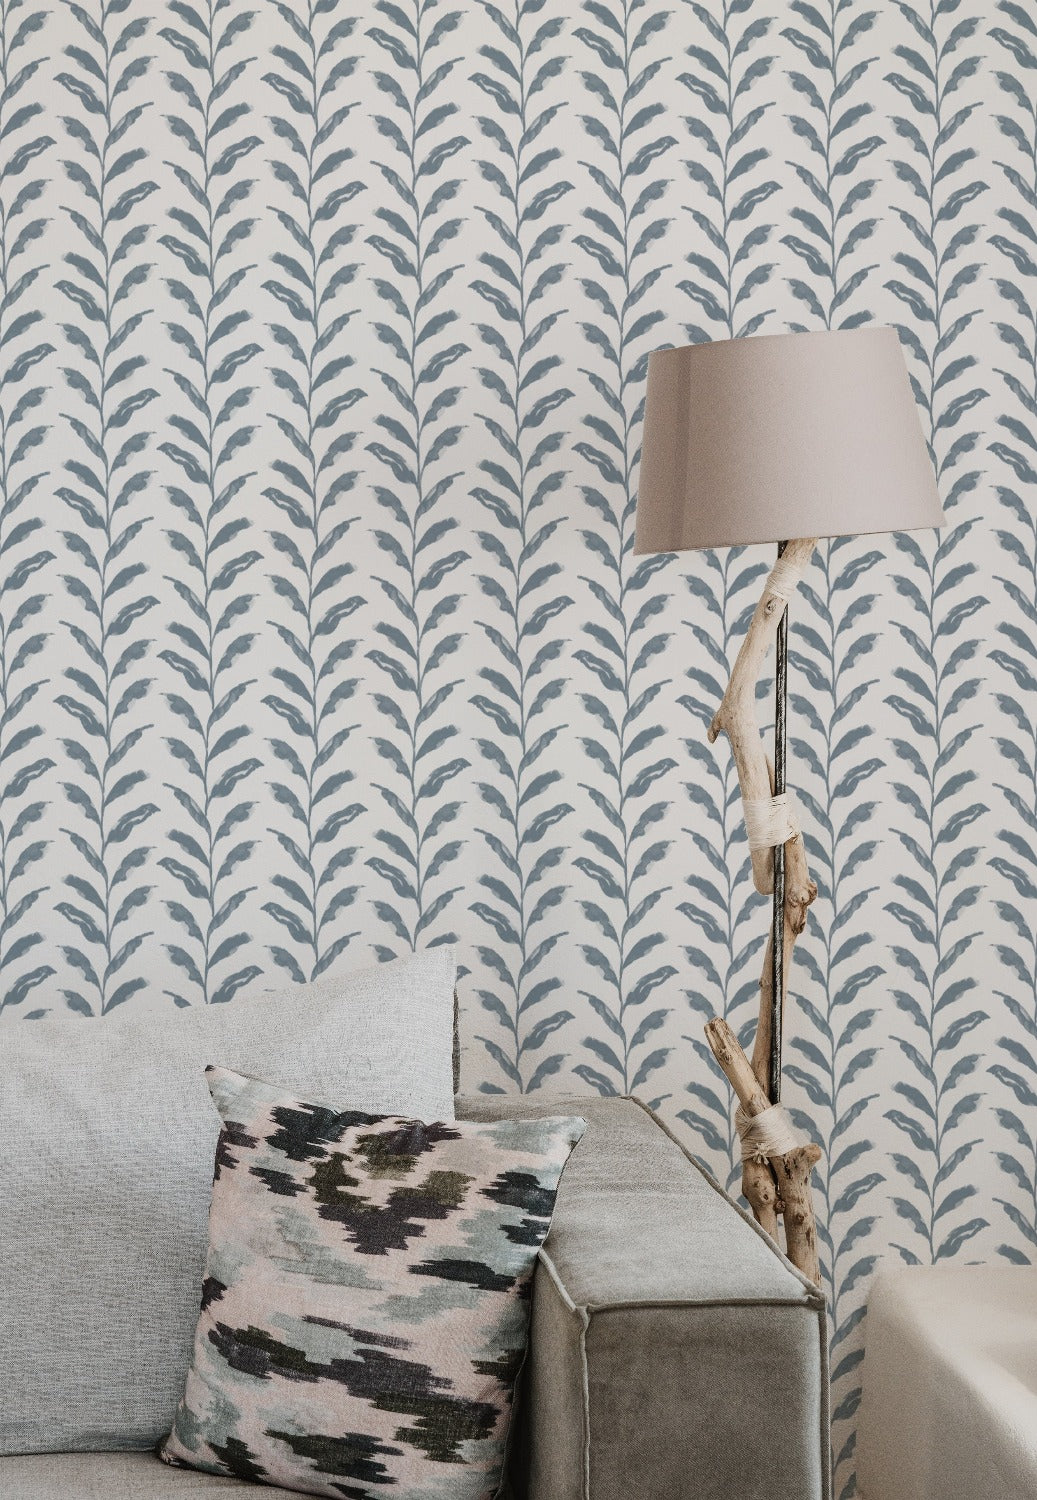 Interior setting featuring a wall adorned with a pale blue floral wallpaper, complemented by a rustic lamp on a wrapped driftwood stand and a patterned cushion on a couch.